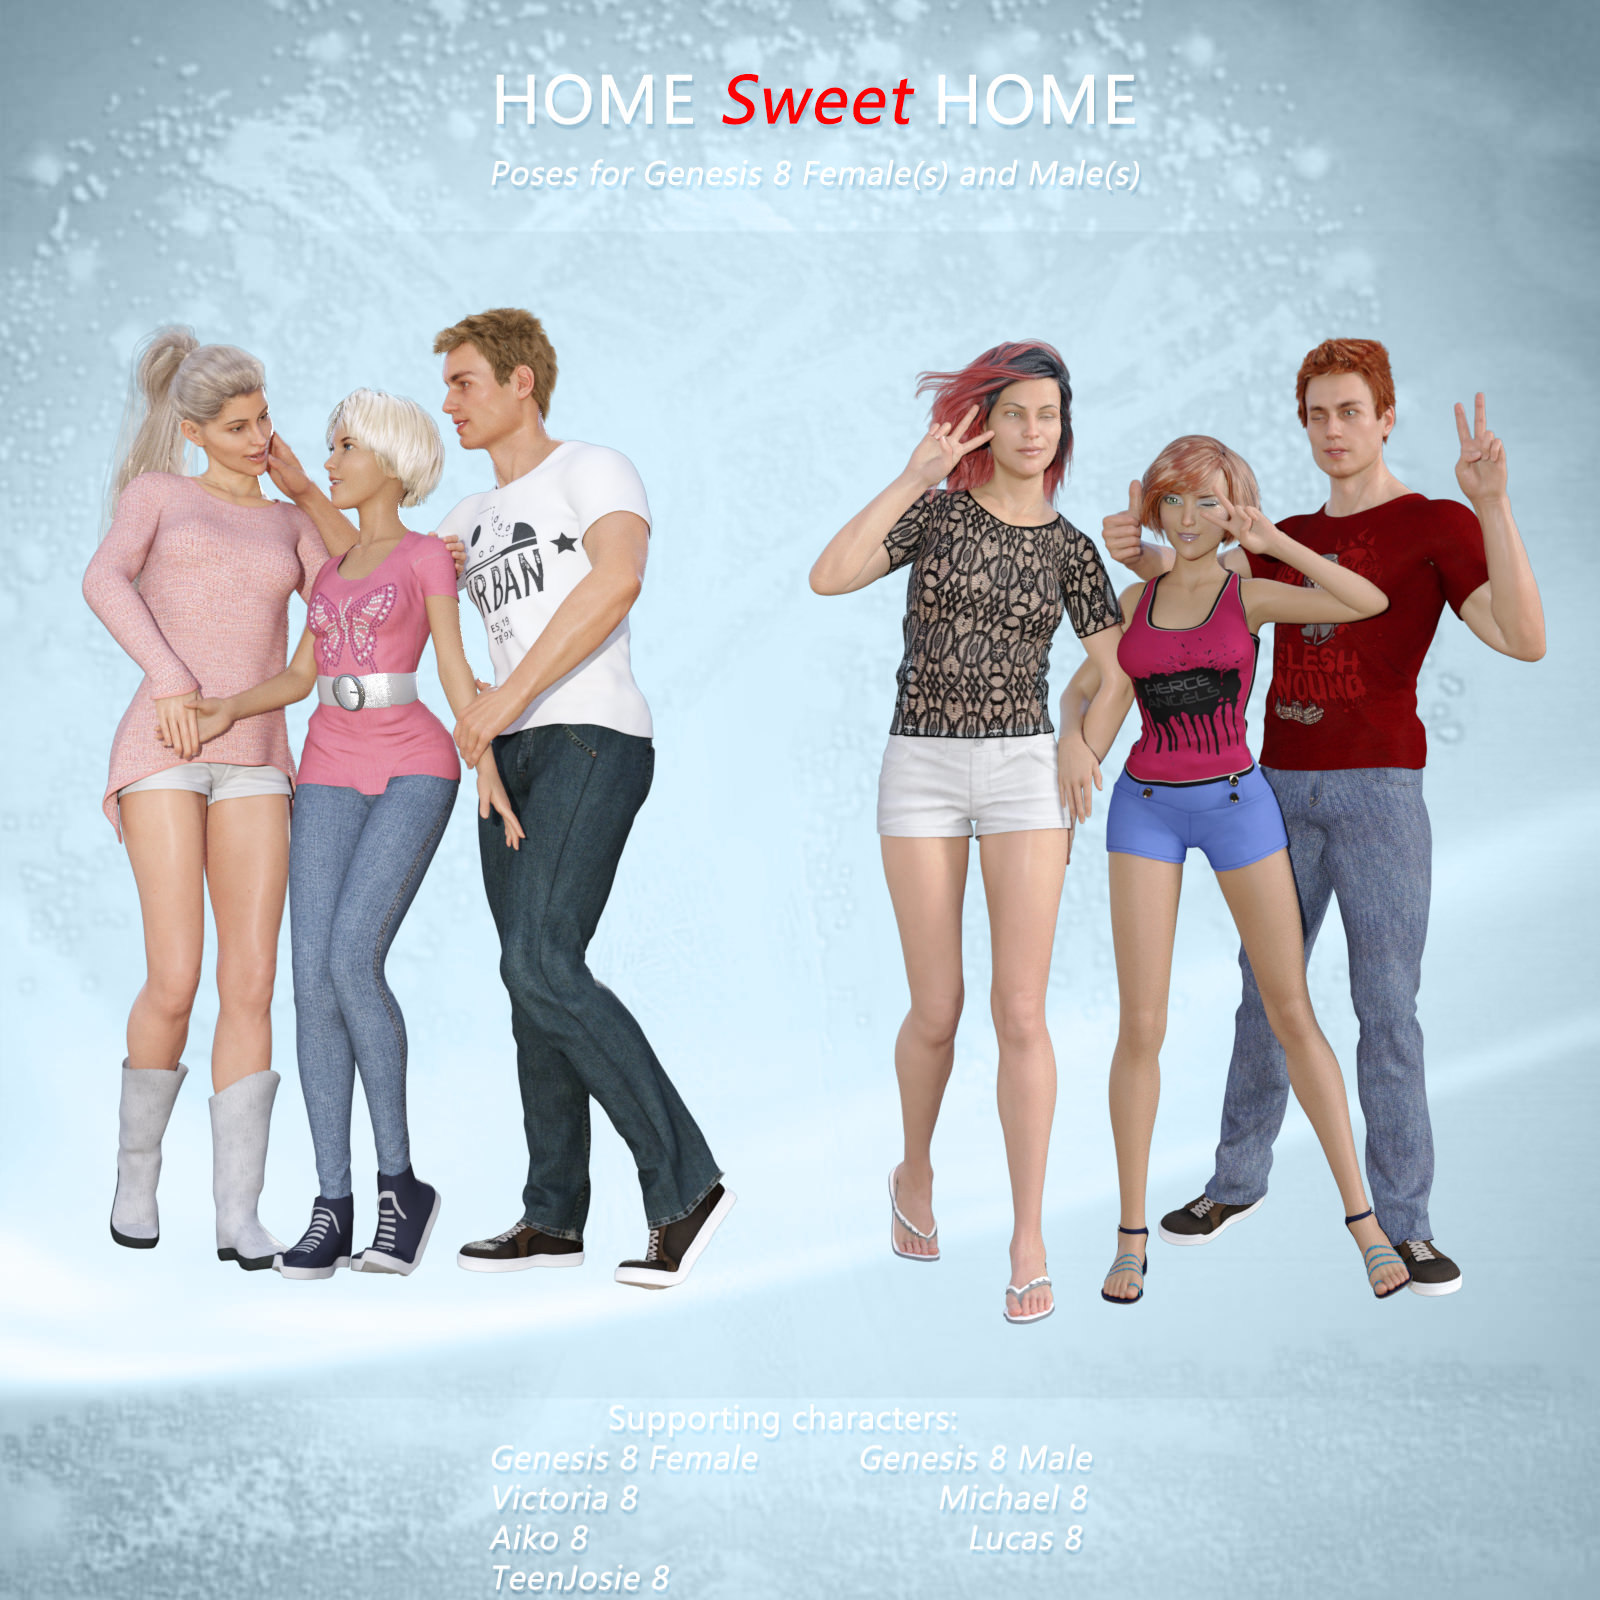 home-sweet-home-poses-for-genesis-8